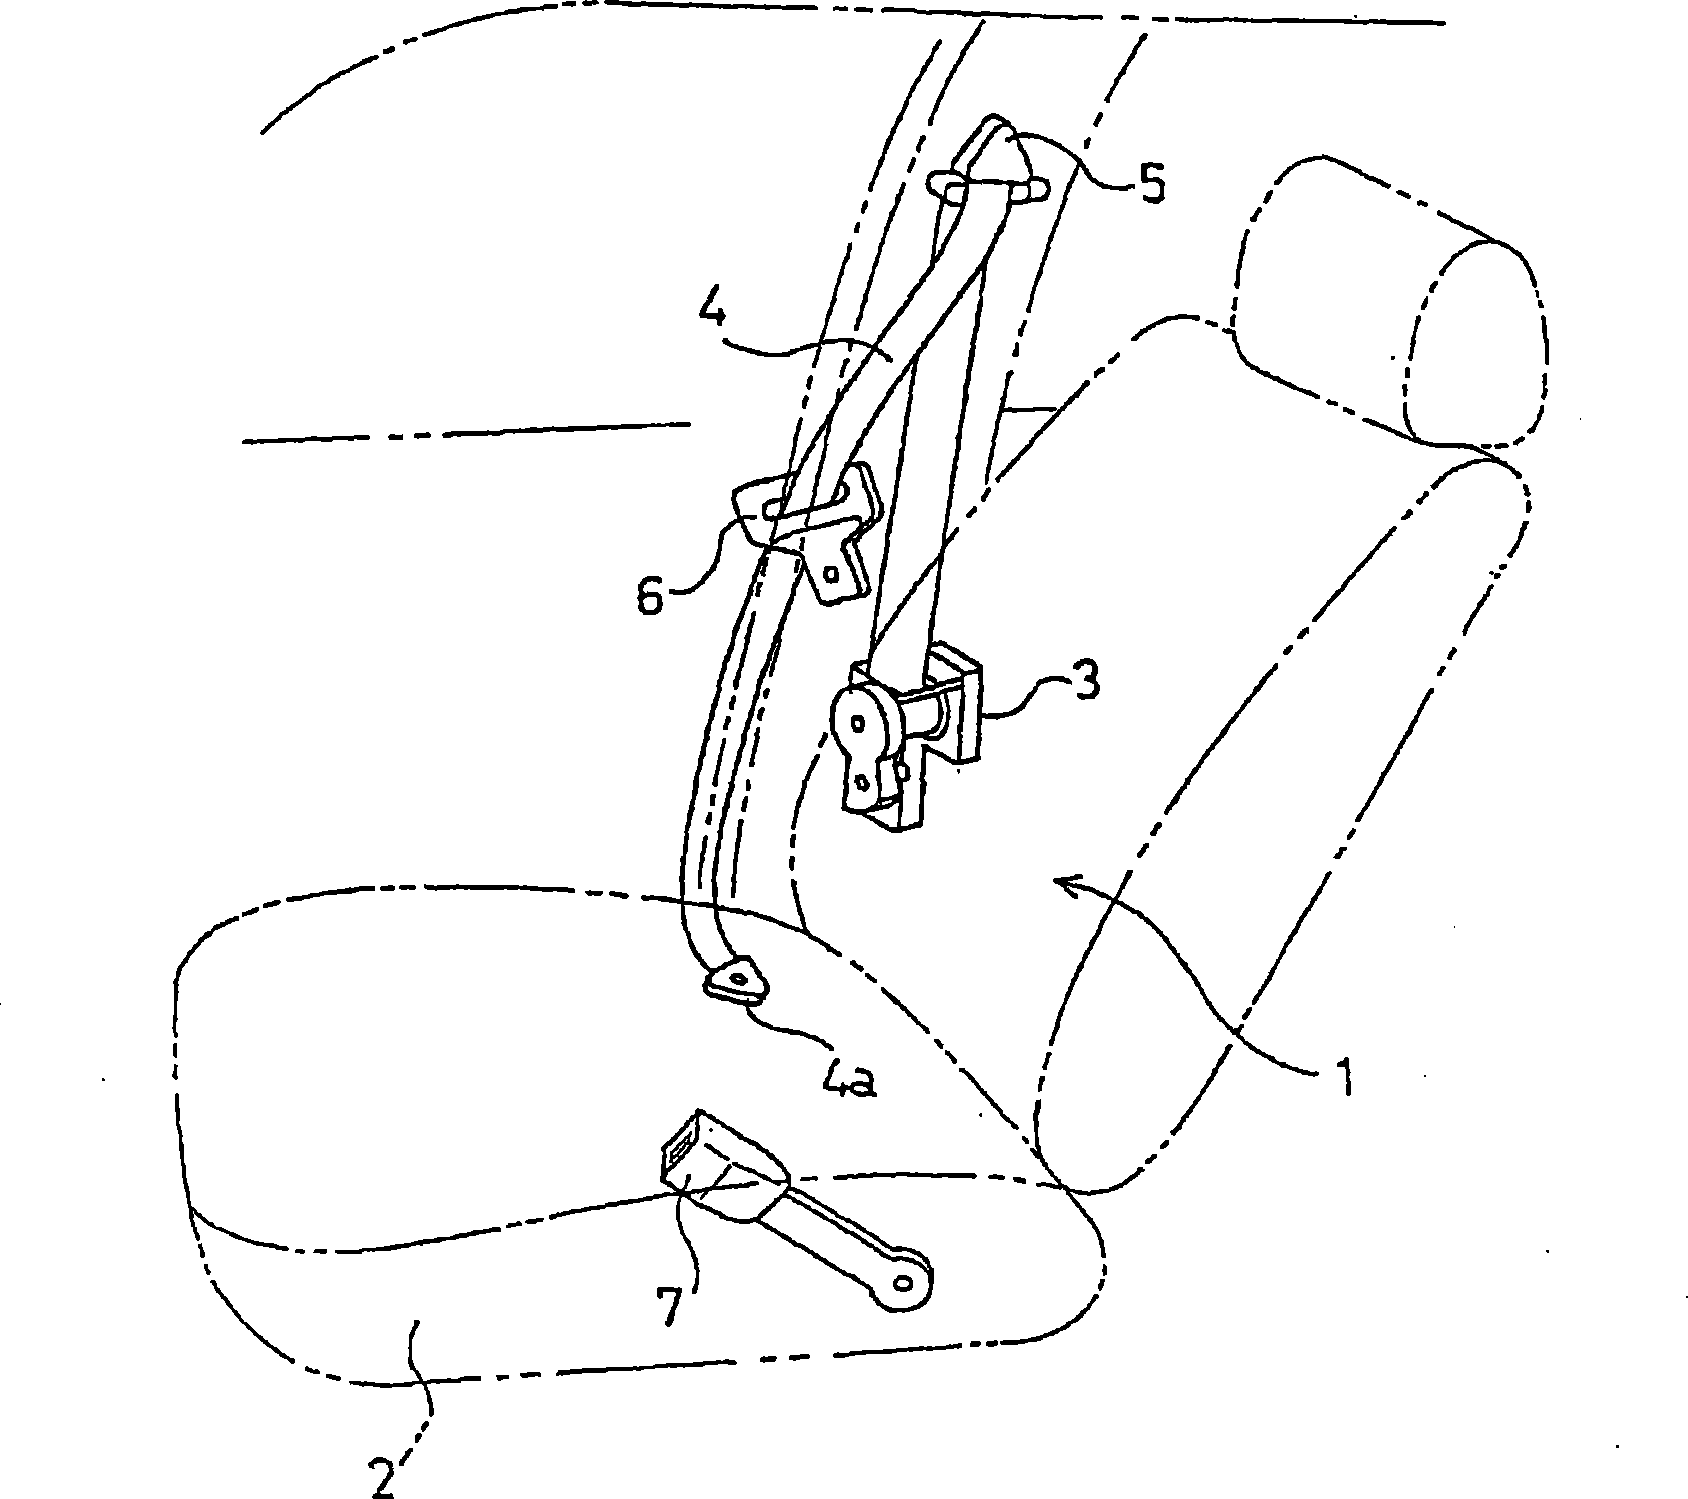 Seat belt retractor and seat belt apparatus employing the same